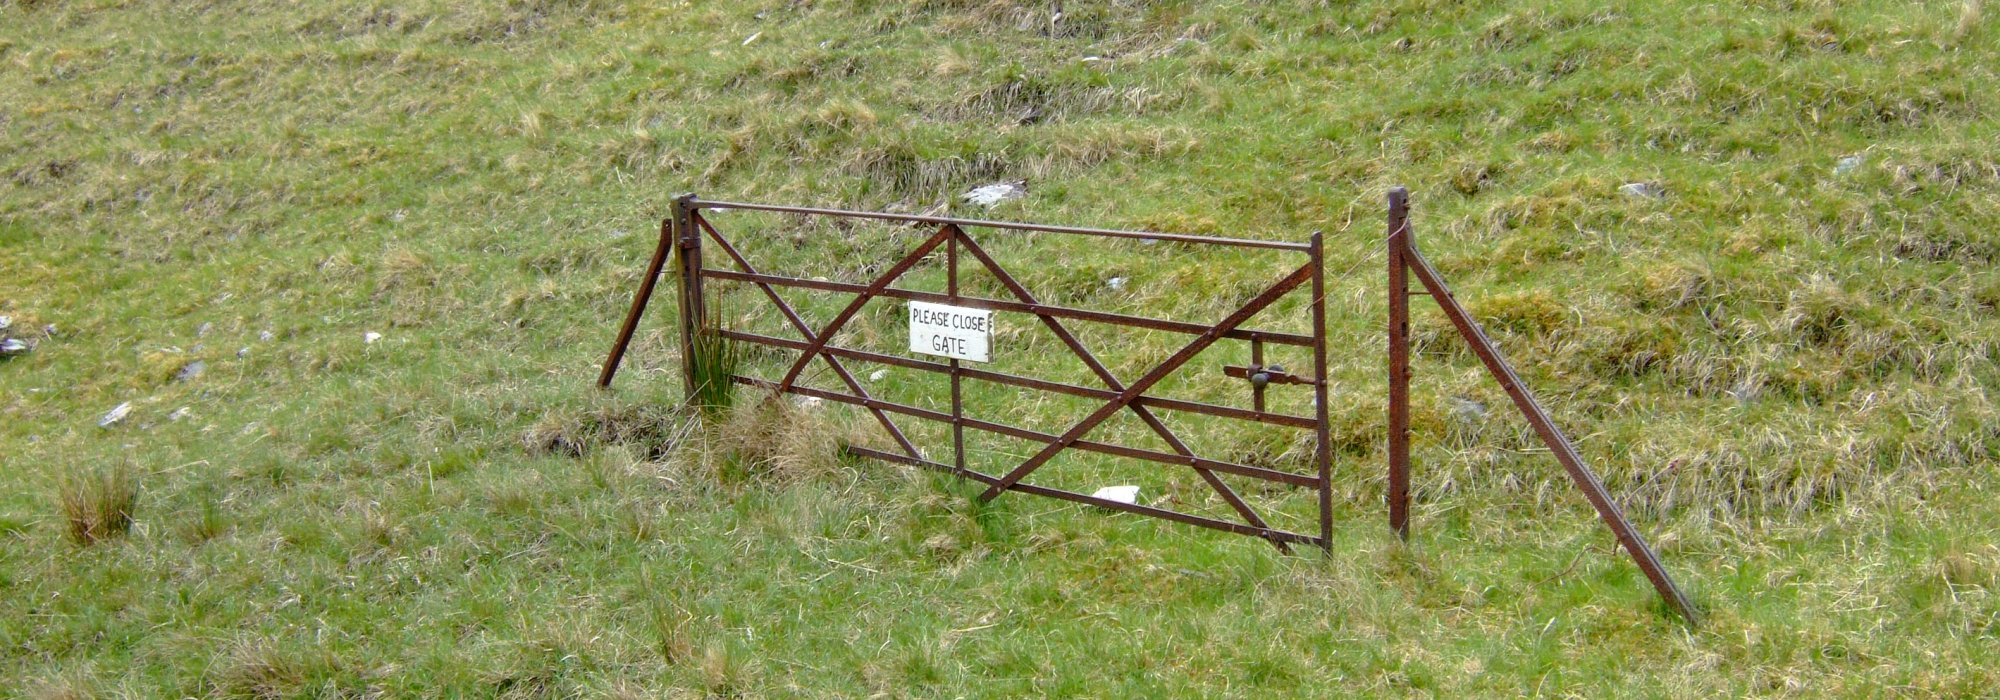 Nomination for the "Most Pointless Gate" award and "Most Pointless Sign" award